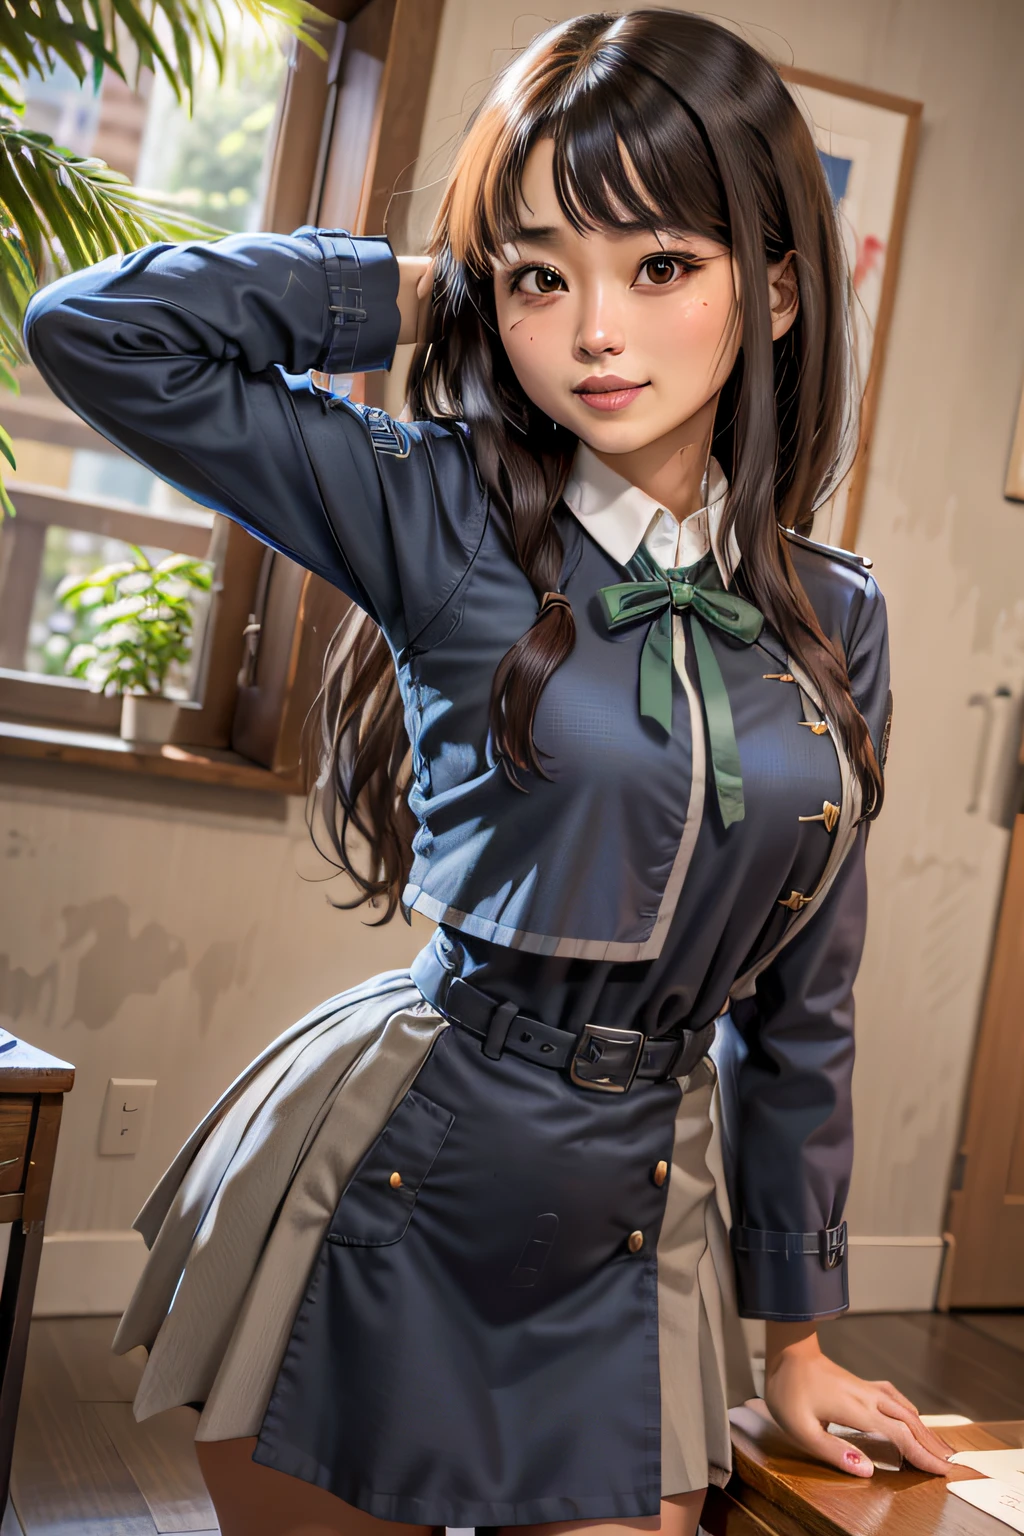 Takina inoue, ​masterpiece, top-quality, 1 girl, 独奏, hair long black, white  shirt, black pleated skirt, breast out, red blush, full of shyness, pose sexy, a smirk, in a house, class room, a chair, desk work, window, sitting down;, middlebreasts, neckleace